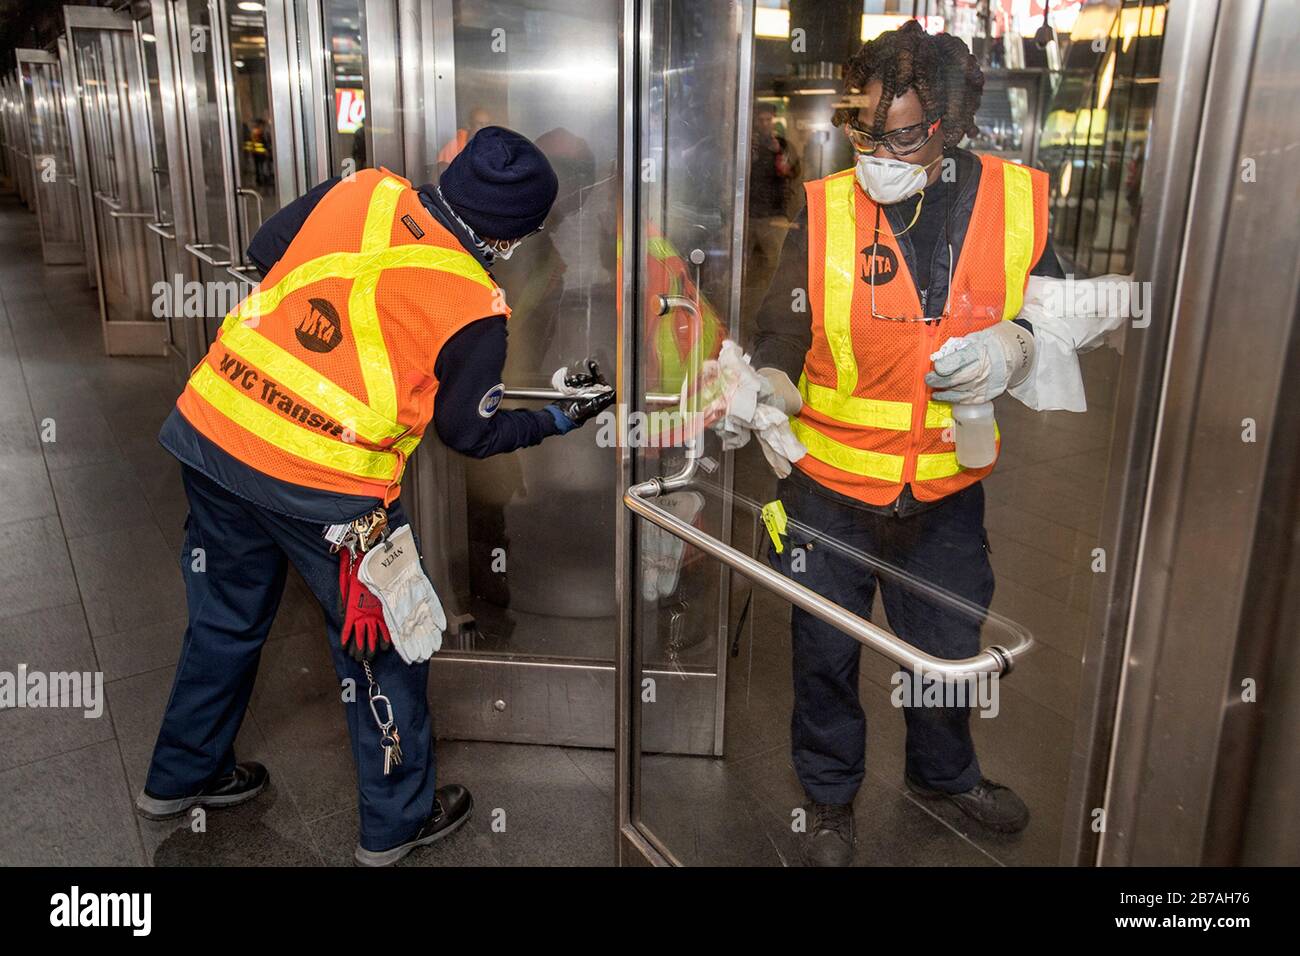 Metropolitan Transportation Authority workers disinfect and sanitizing door handles to prevent the COVID-19, coronavirus in the New York City Transit subway system March 12, 2020 in New York City, New York. Stock Photo